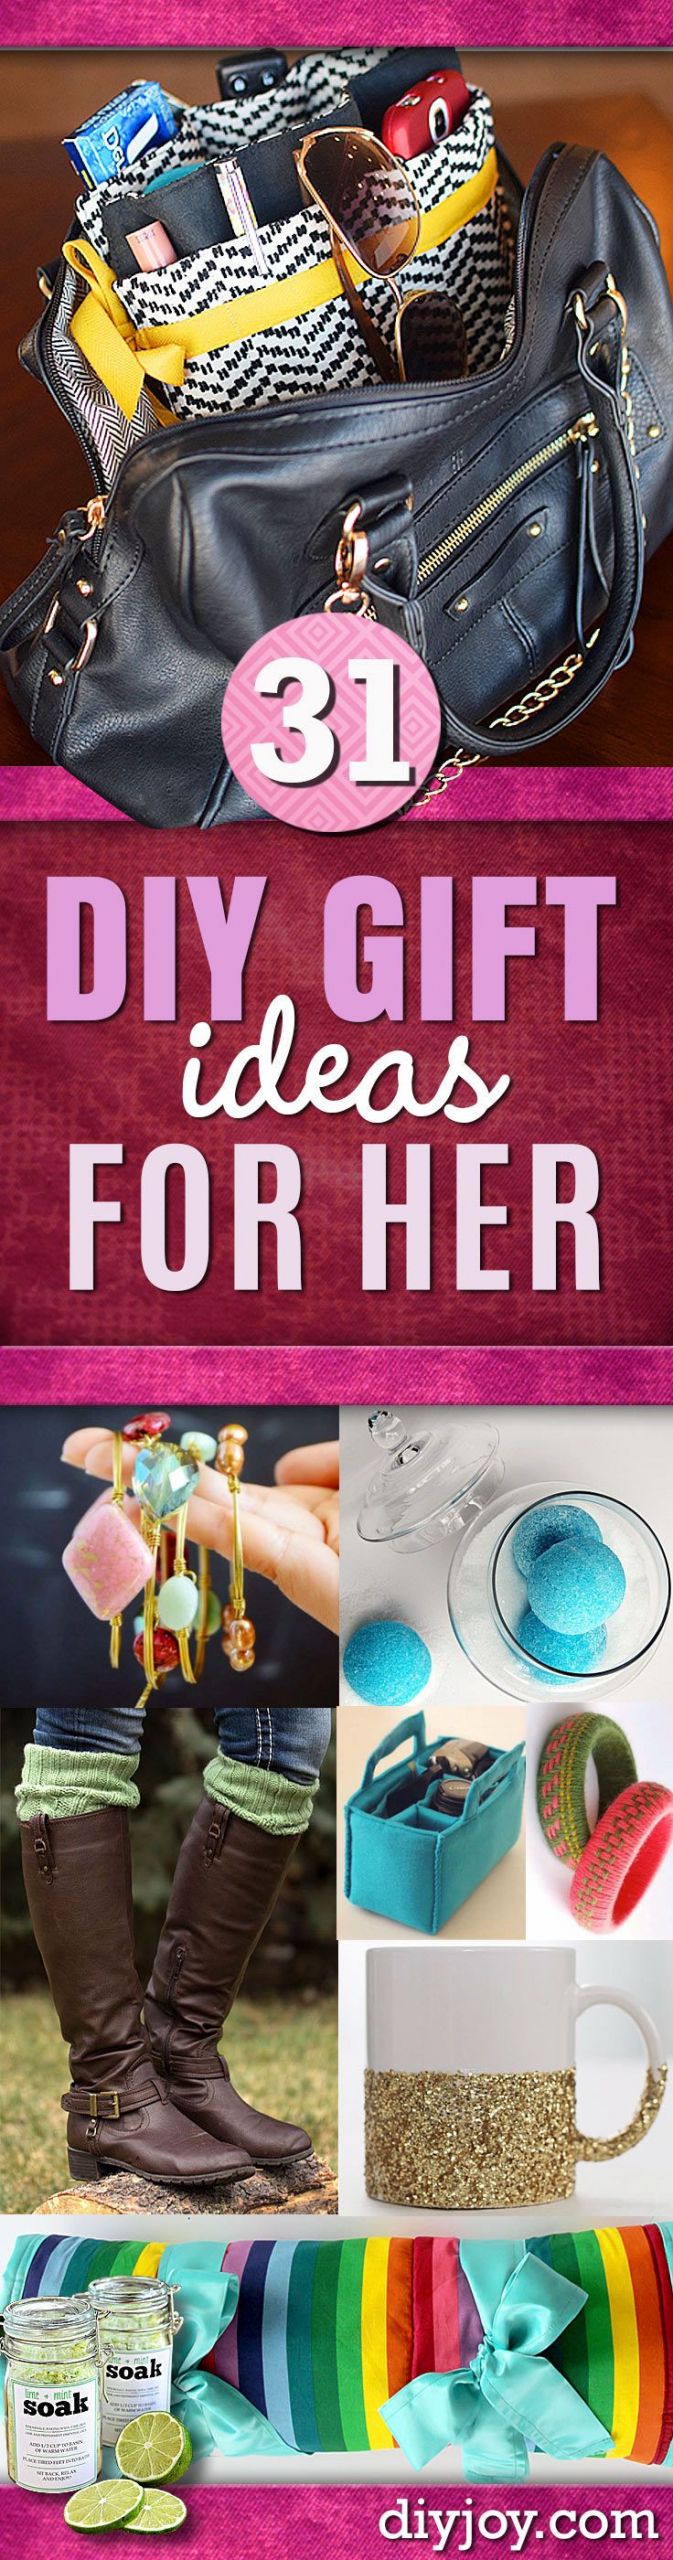 Small Gift Ideas For Girlfriend
 Super Special DIY Gift Ideas for Her DIY JOY